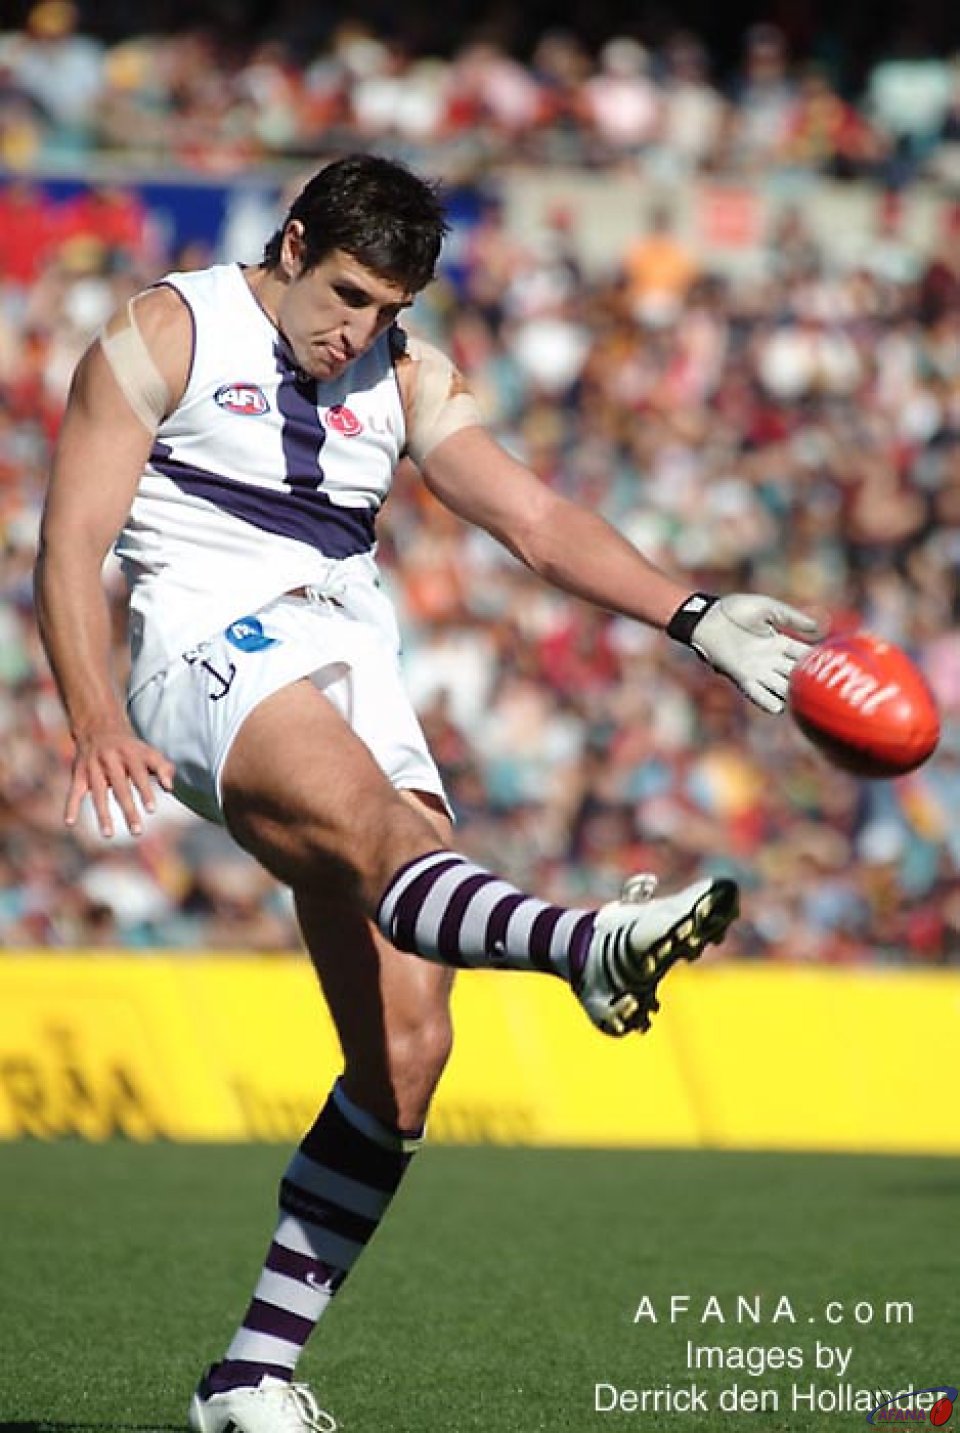 [b]Matthew Pavlich drives deep into the forward attacking zone for the Dockers[/b]